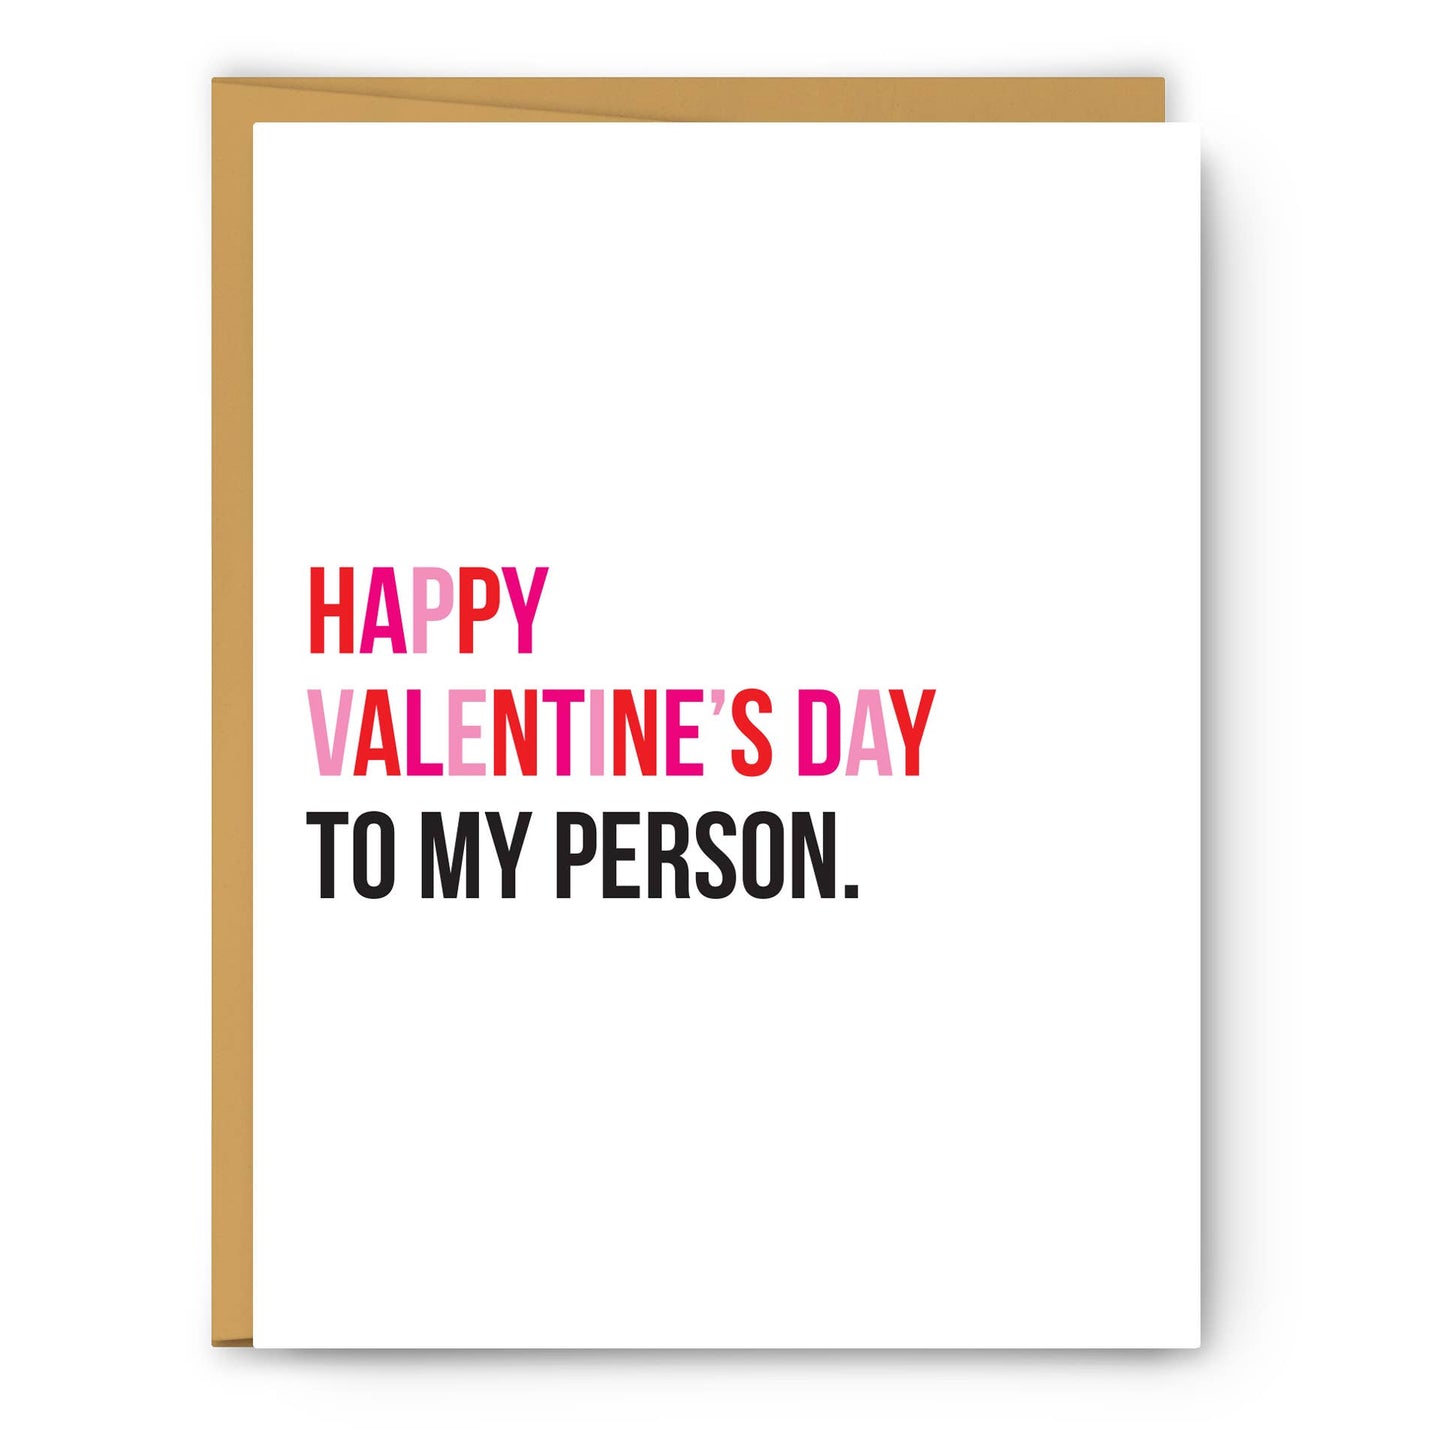 To My Person - Valentine's Day Card